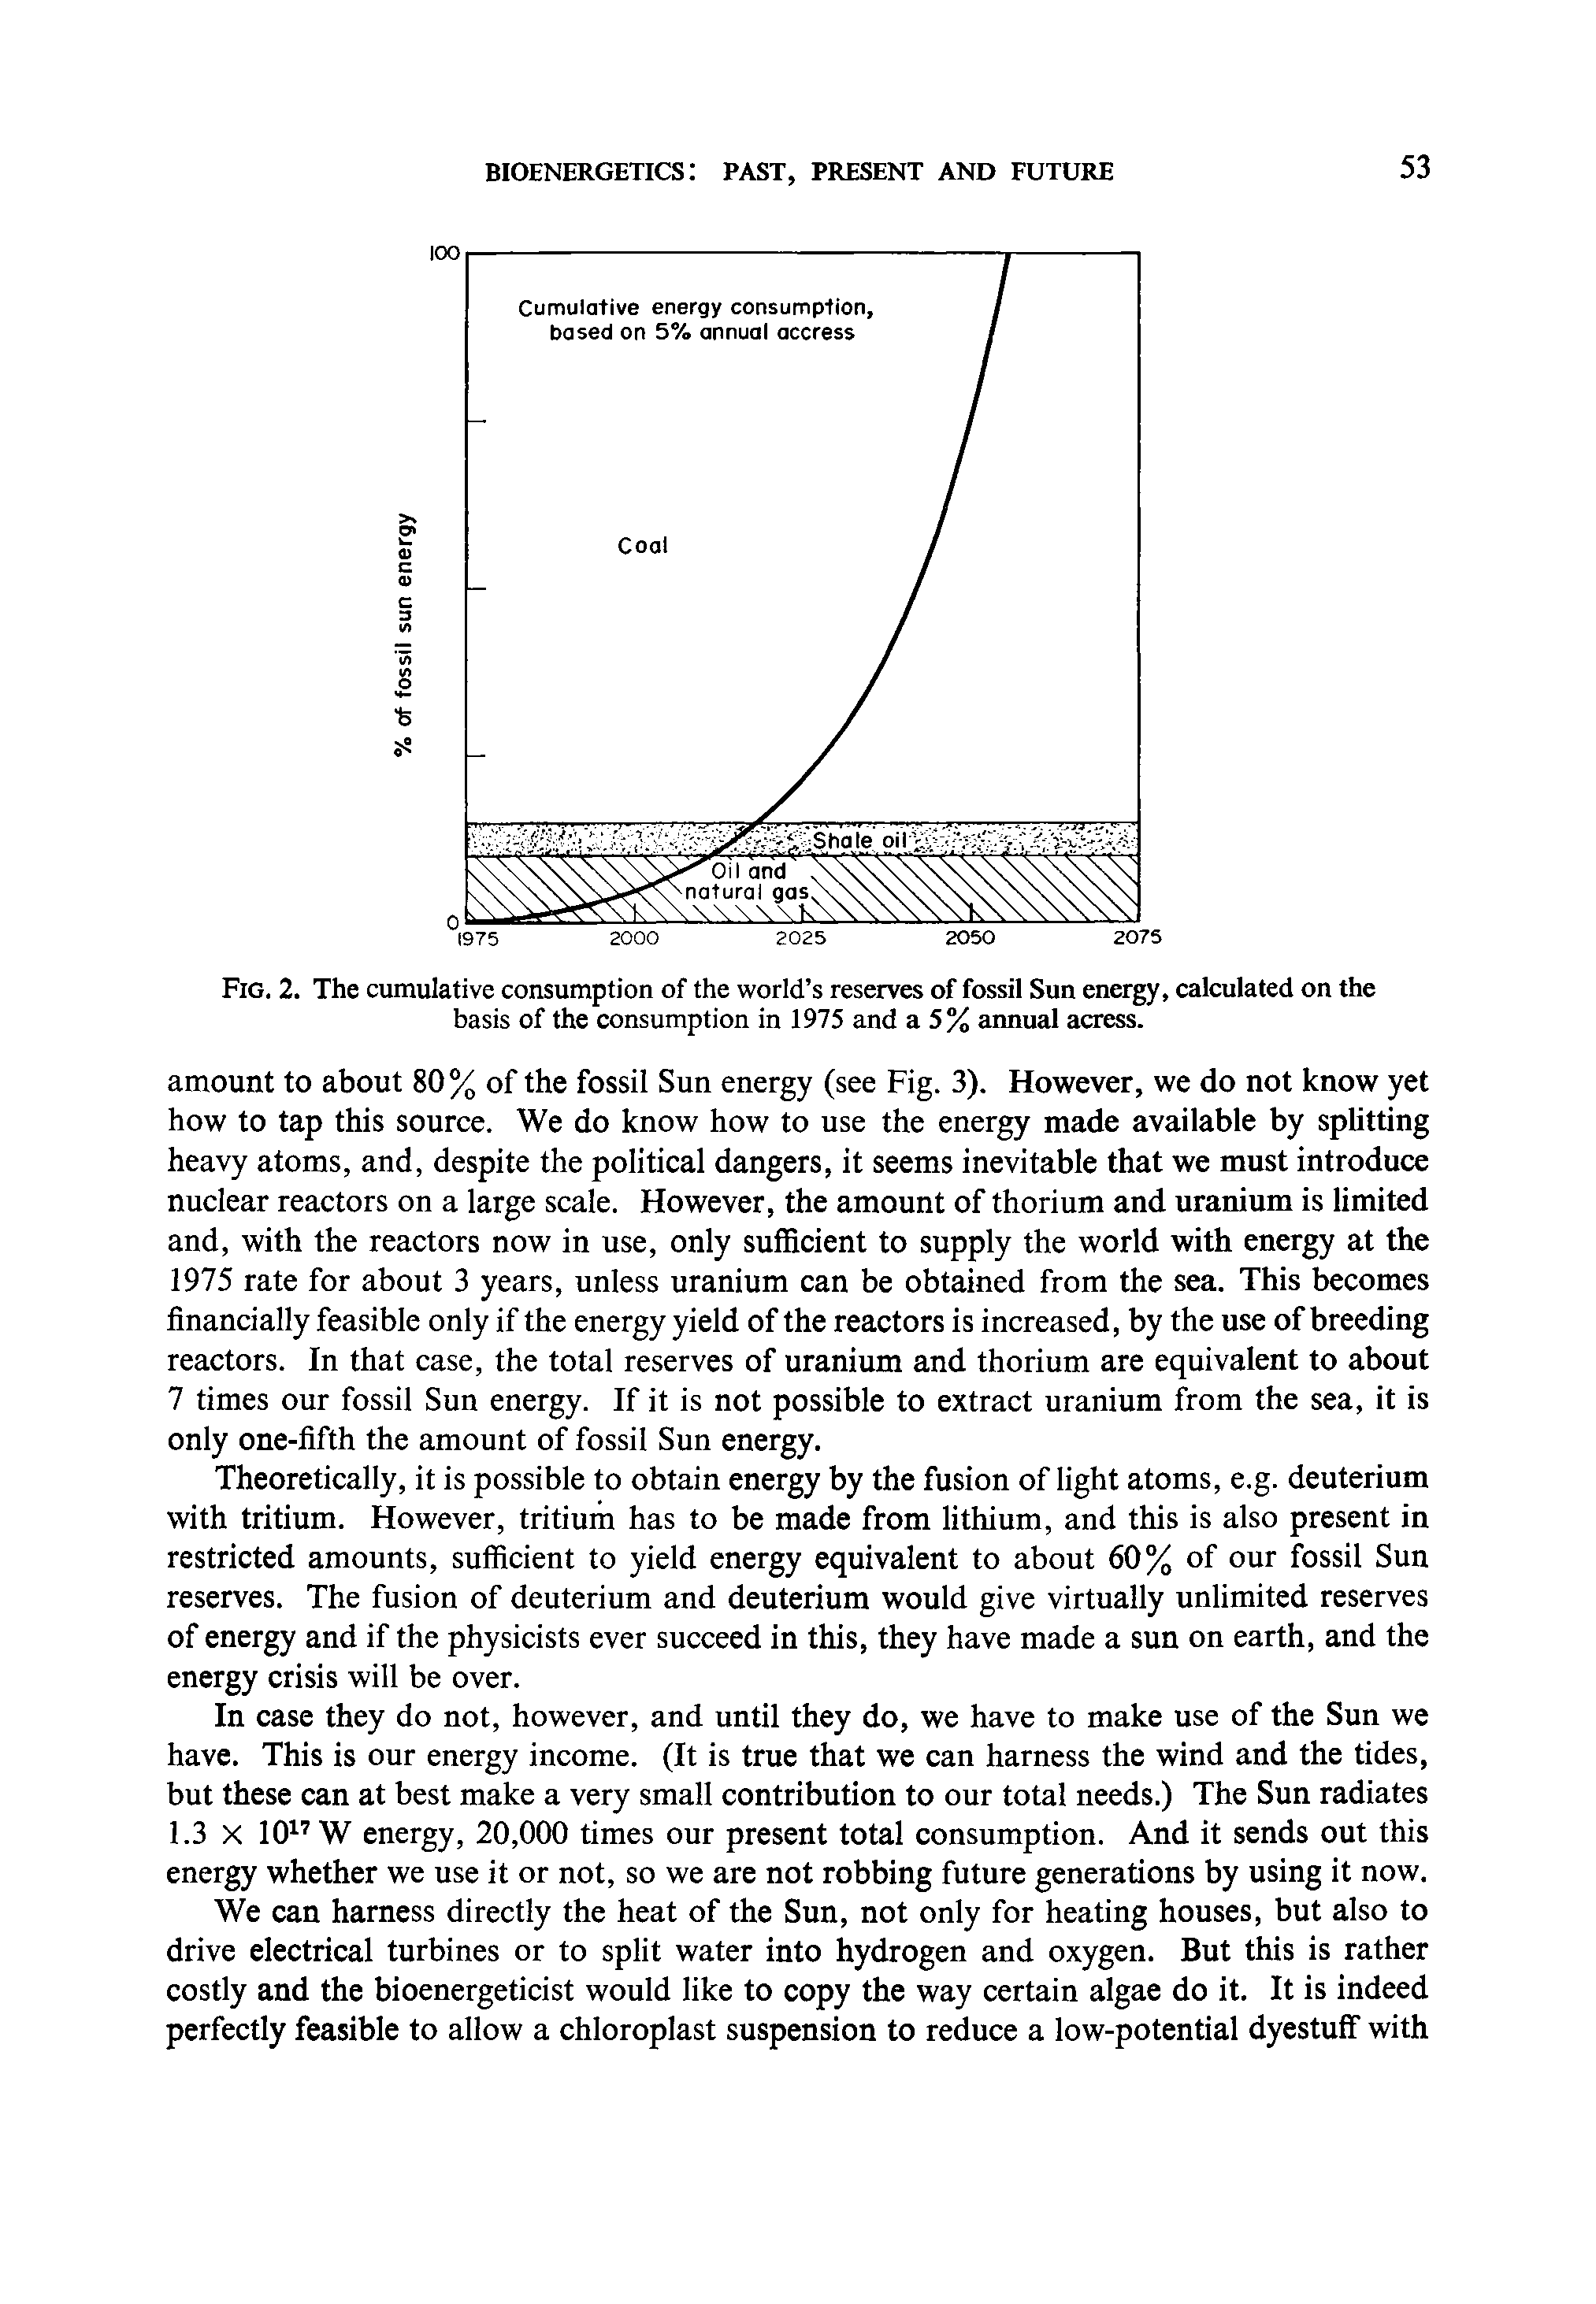 Fig. 2. The cumulative consumption of the world s reserves of fossil Sun energy, calculated on the basis of the consumption in 1975 and a 5% atmual acress.